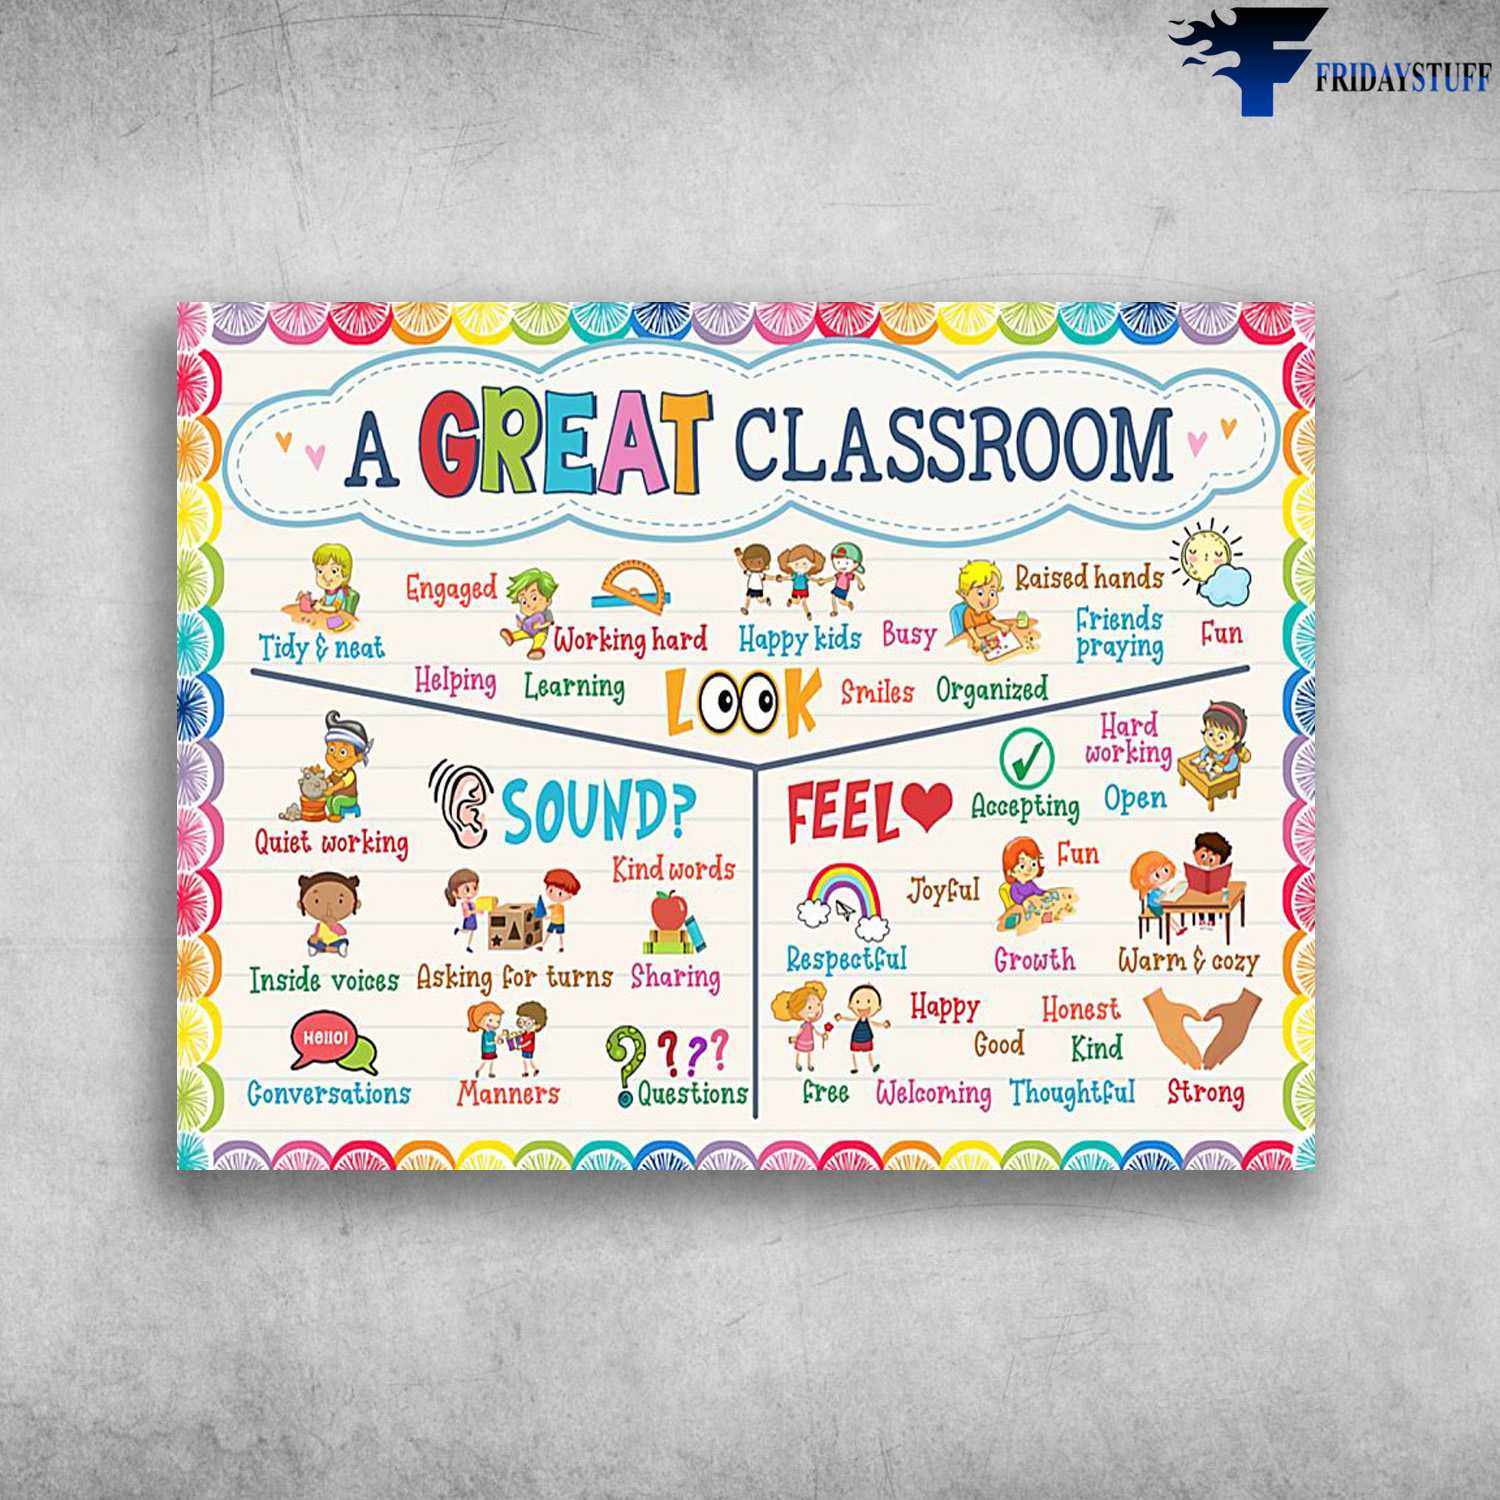 Classroom Poster - A Great Classroom, Happy Kids, Quist Working, Kind Words, Warm And Cozy